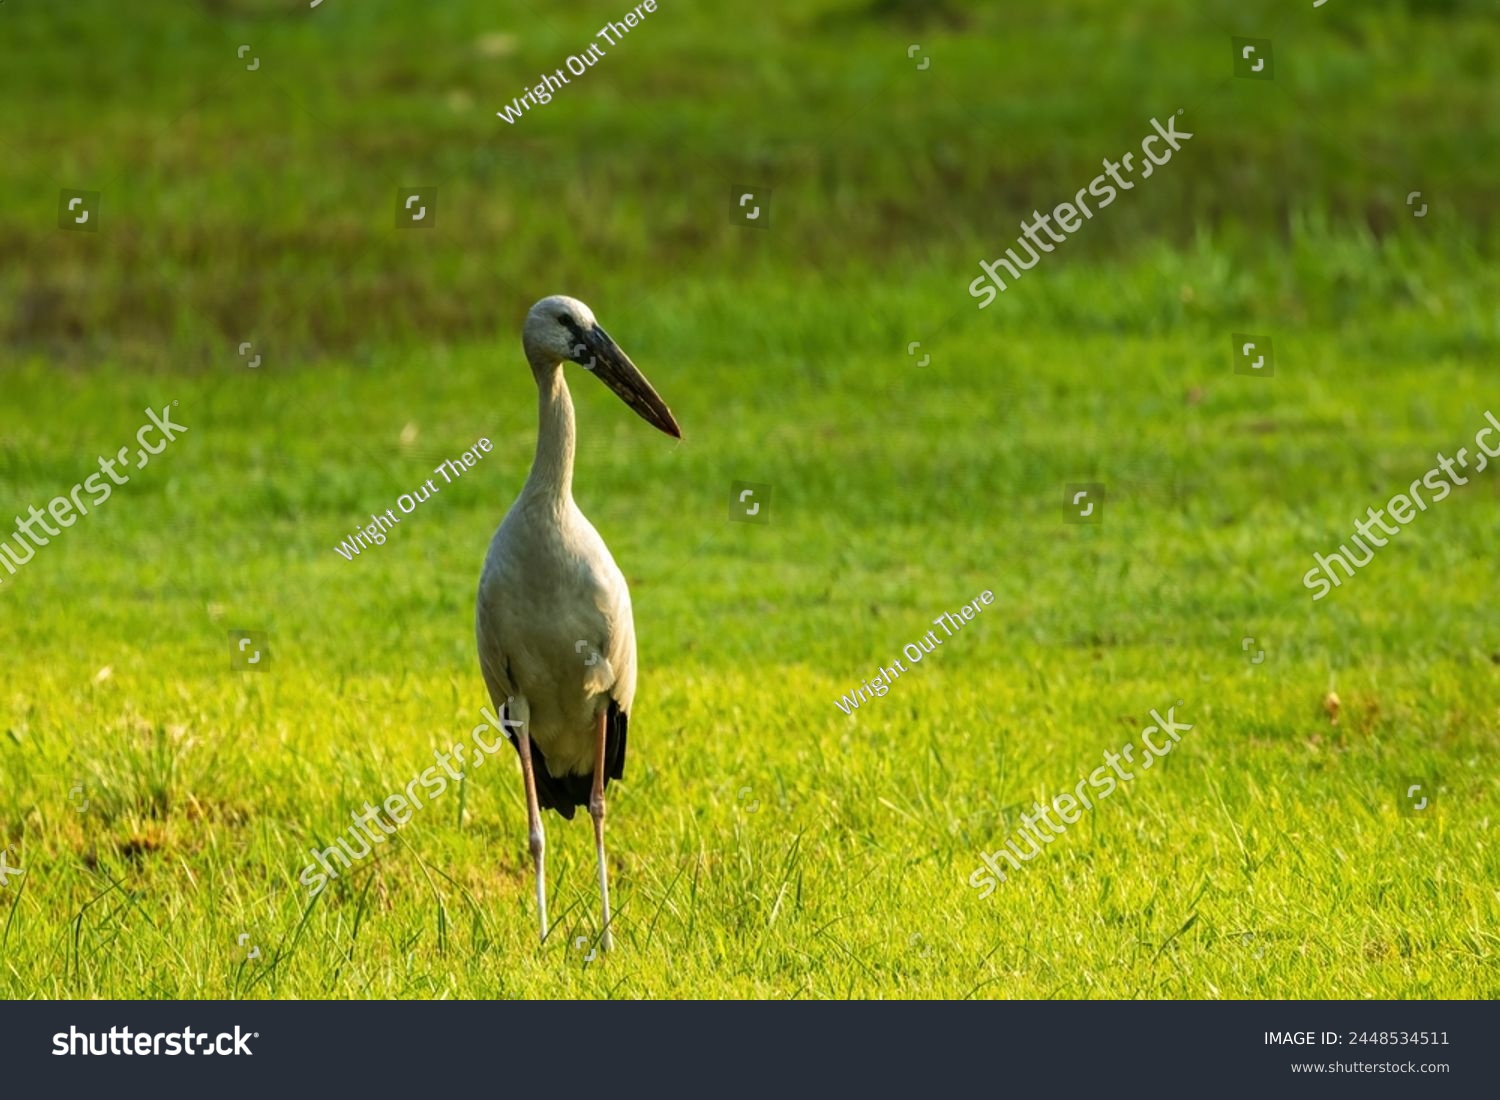 The Asian Openbill (Anastomus oscitans) is a distinctive stork species characterized by its unique bill, which has a distinctive gap between the upper and lower mandibles, resembling a 'bill clasp' #2448534511